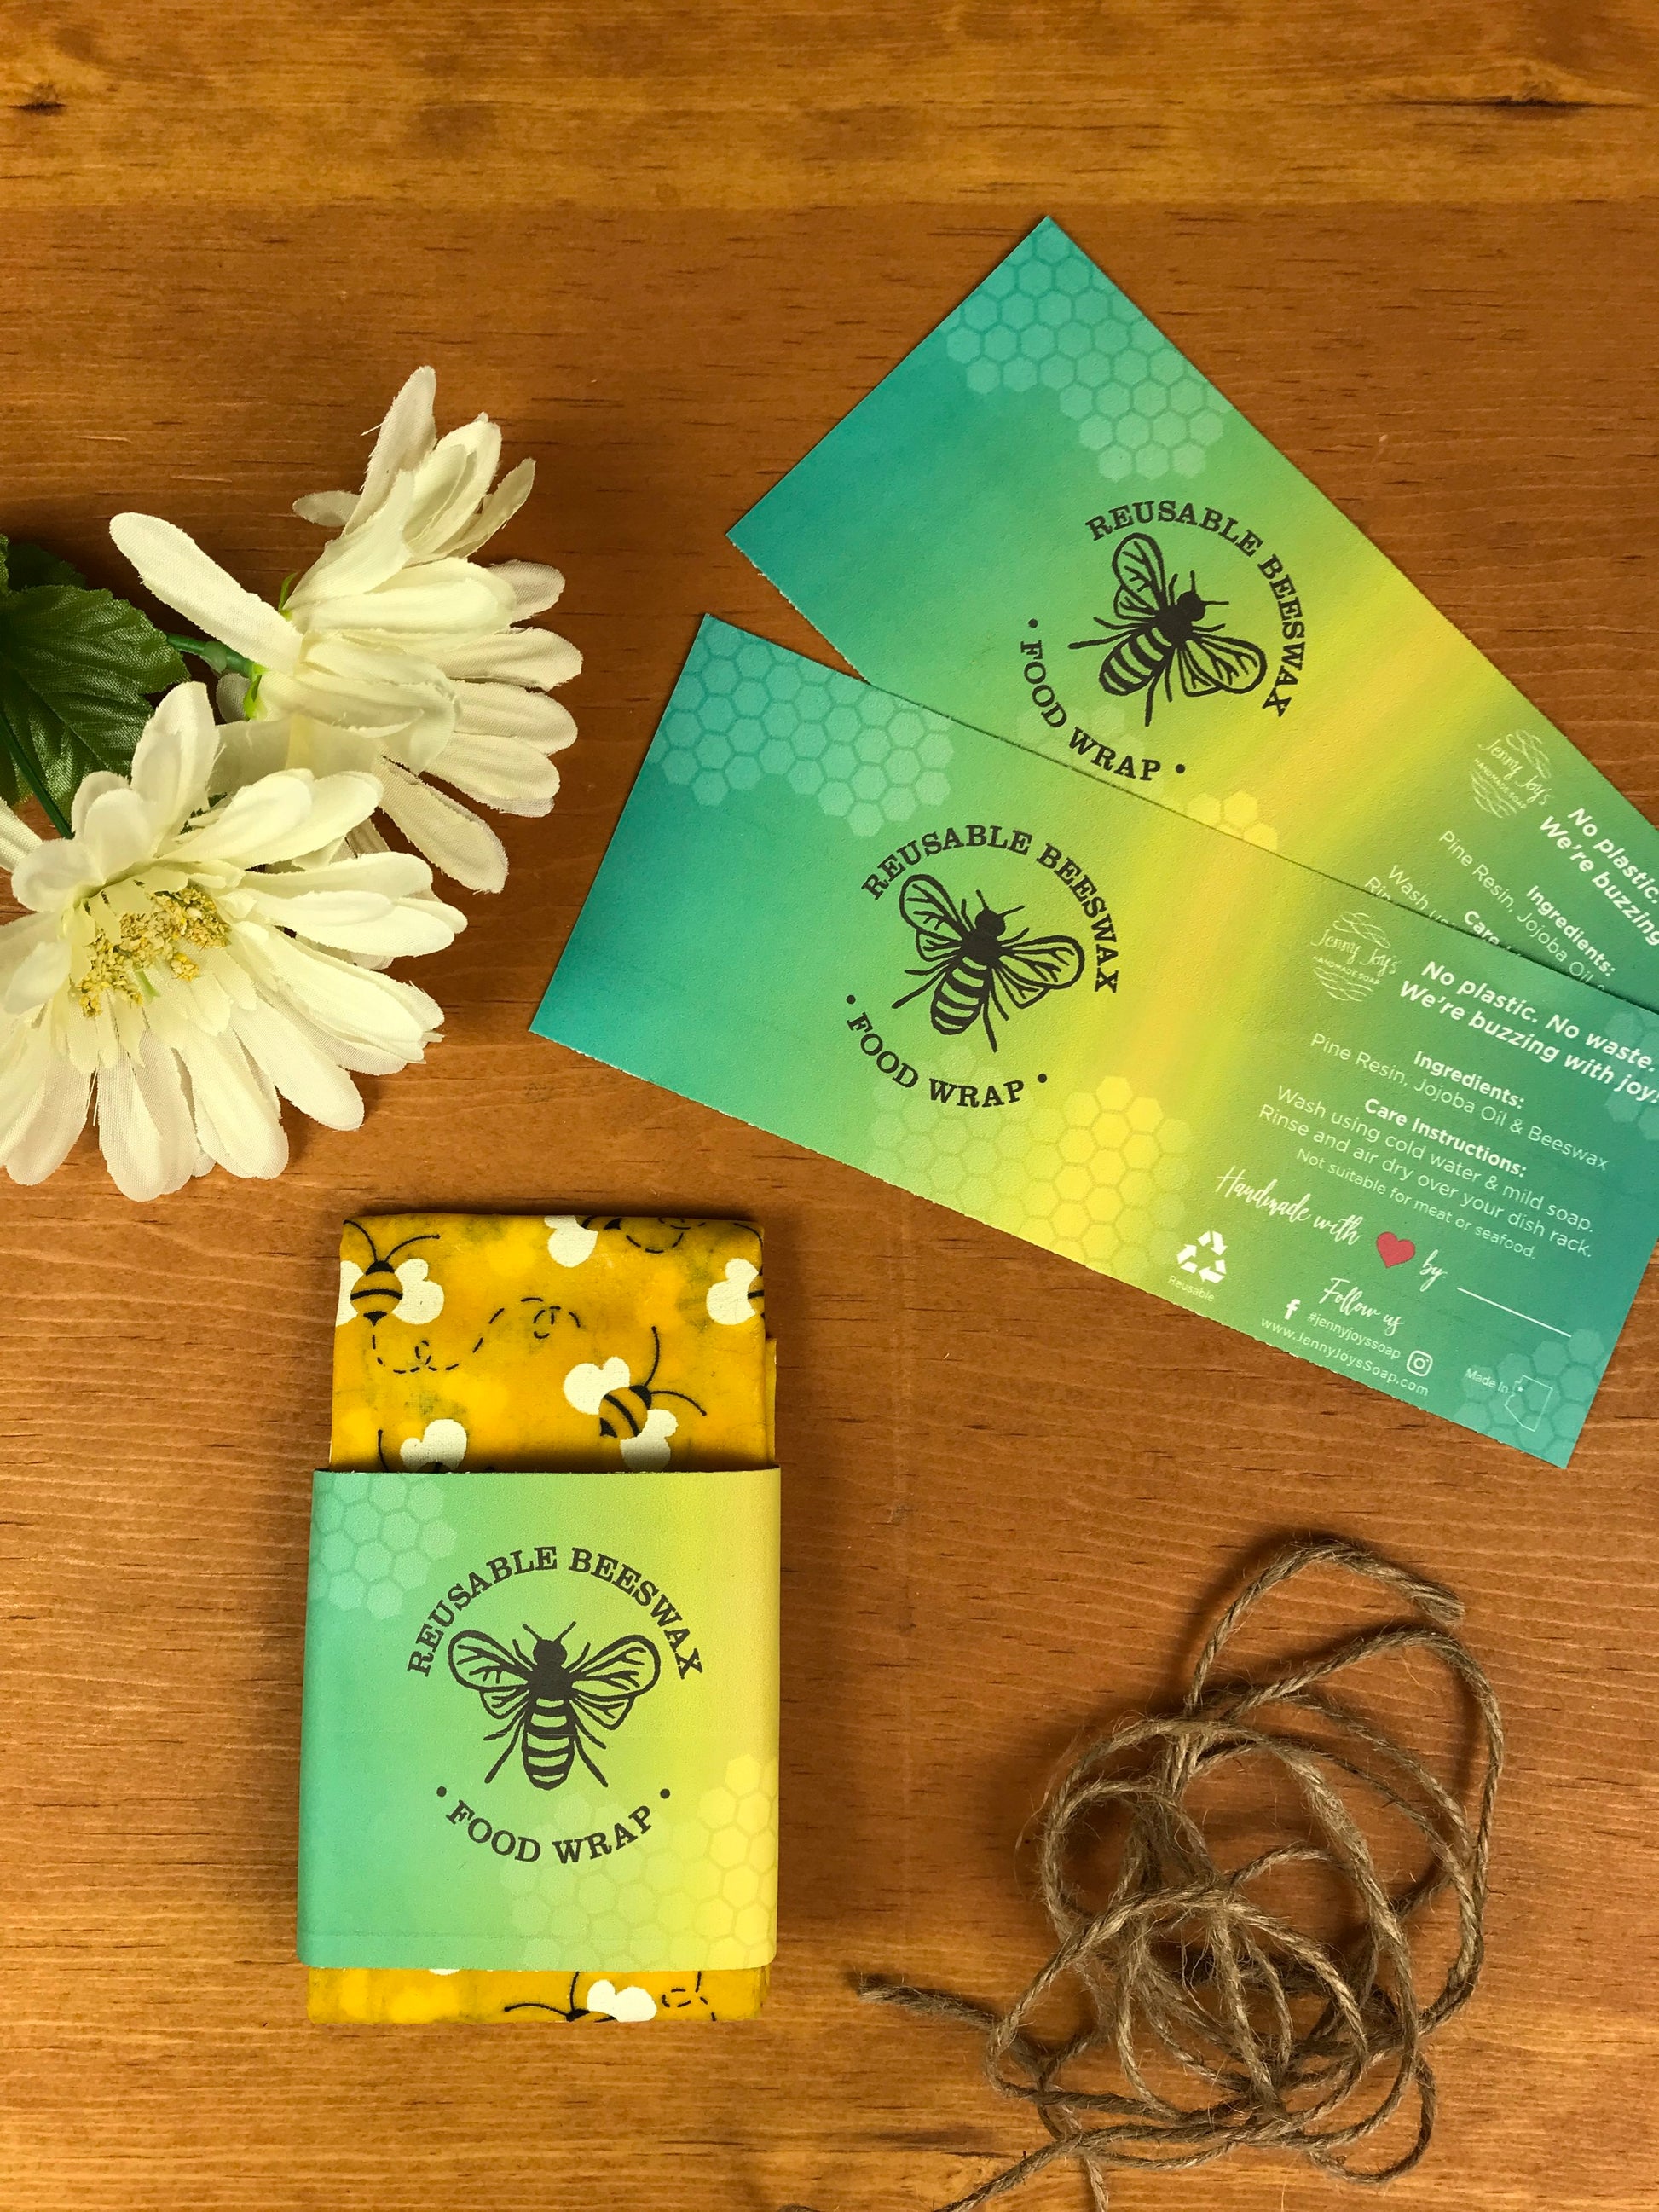 DIY Beeswax Wraps with Free Printable + Editable Favor Labels